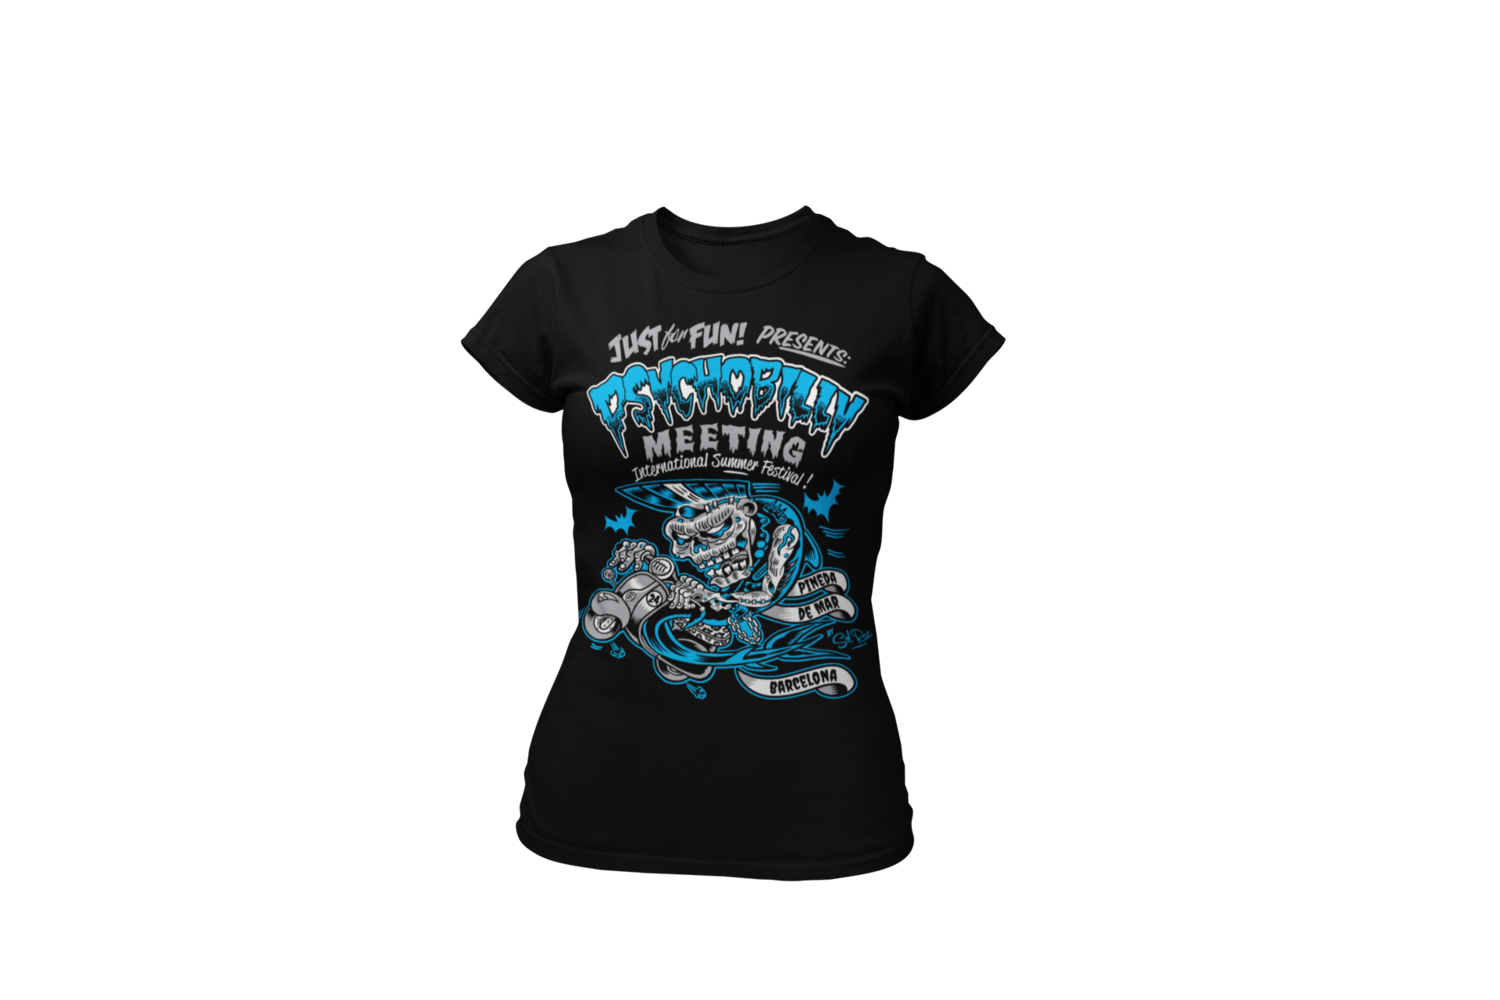 PSYCHOBILLY MEETING 2016 T-SHIRT WOMAN BY SOLRAC